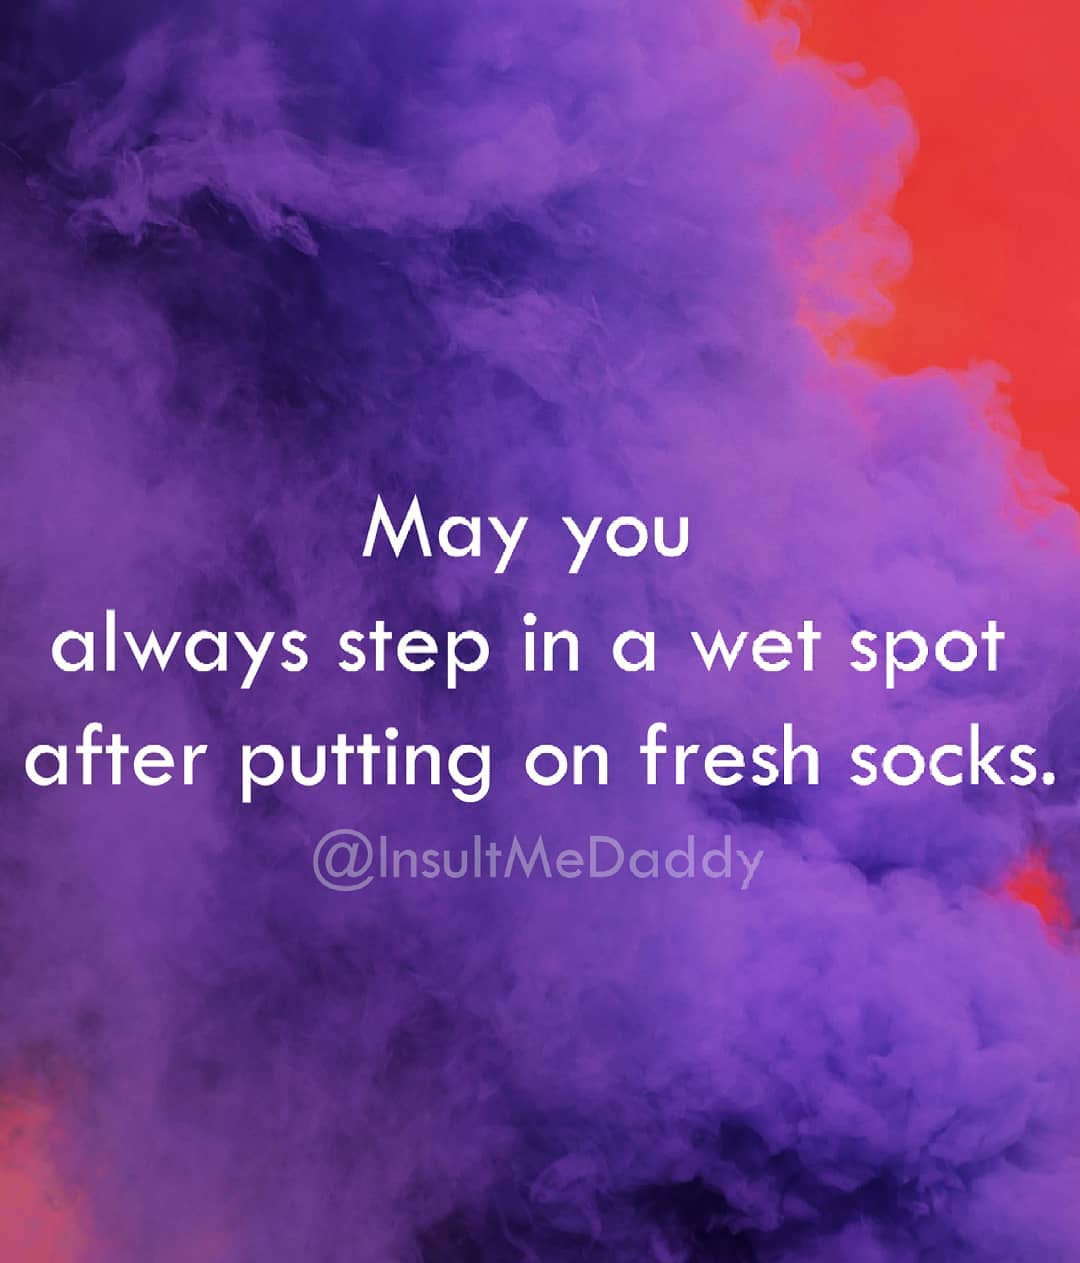 sky - May you always step in a wet spot after putting on fresh socks.